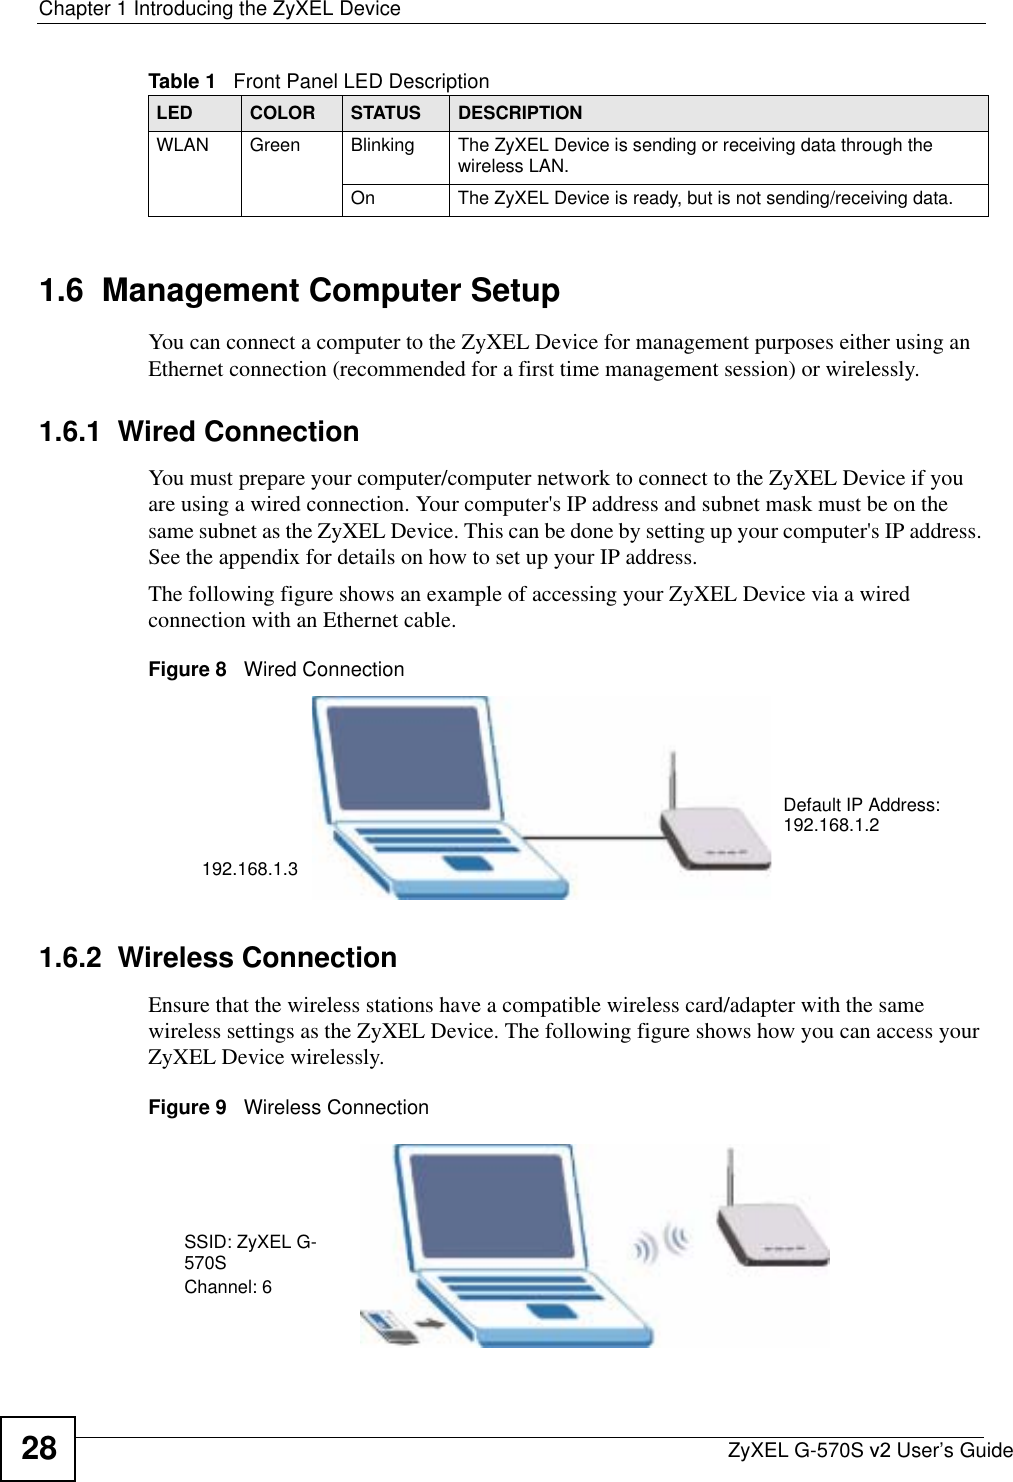 Chapter 1 Introducing the ZyXEL DeviceZyXEL G-570S v2 User’s Guide281.6  Management Computer SetupYou can connect a computer to the ZyXEL Device for management purposes either using an Ethernet connection (recommended for a first time management session) or wirelessly.1.6.1  Wired ConnectionYou must prepare your computer/computer network to connect to the ZyXEL Device if you are using a wired connection. Your computer&apos;s IP address and subnet mask must be on the same subnet as the ZyXEL Device. This can be done by setting up your computer&apos;s IP address. See the appendix for details on how to set up your IP address.The following figure shows an example of accessing your ZyXEL Device via a wired connection with an Ethernet cable.Figure 8   Wired Connection1.6.2  Wireless ConnectionEnsure that the wireless stations have a compatible wireless card/adapter with the same wireless settings as the ZyXEL Device. The following figure shows how you can access your ZyXEL Device wirelessly.Figure 9   Wireless ConnectionWLAN Green Blinking The ZyXEL Device is sending or receiving data through the wireless LAN.On The ZyXEL Device is ready, but is not sending/receiving data.Table 1   Front Panel LED DescriptionLED COLOR STATUS DESCRIPTION192.168.1.3Default IP Address: 192.168.1.2SSID: ZyXEL G-570SChannel: 6